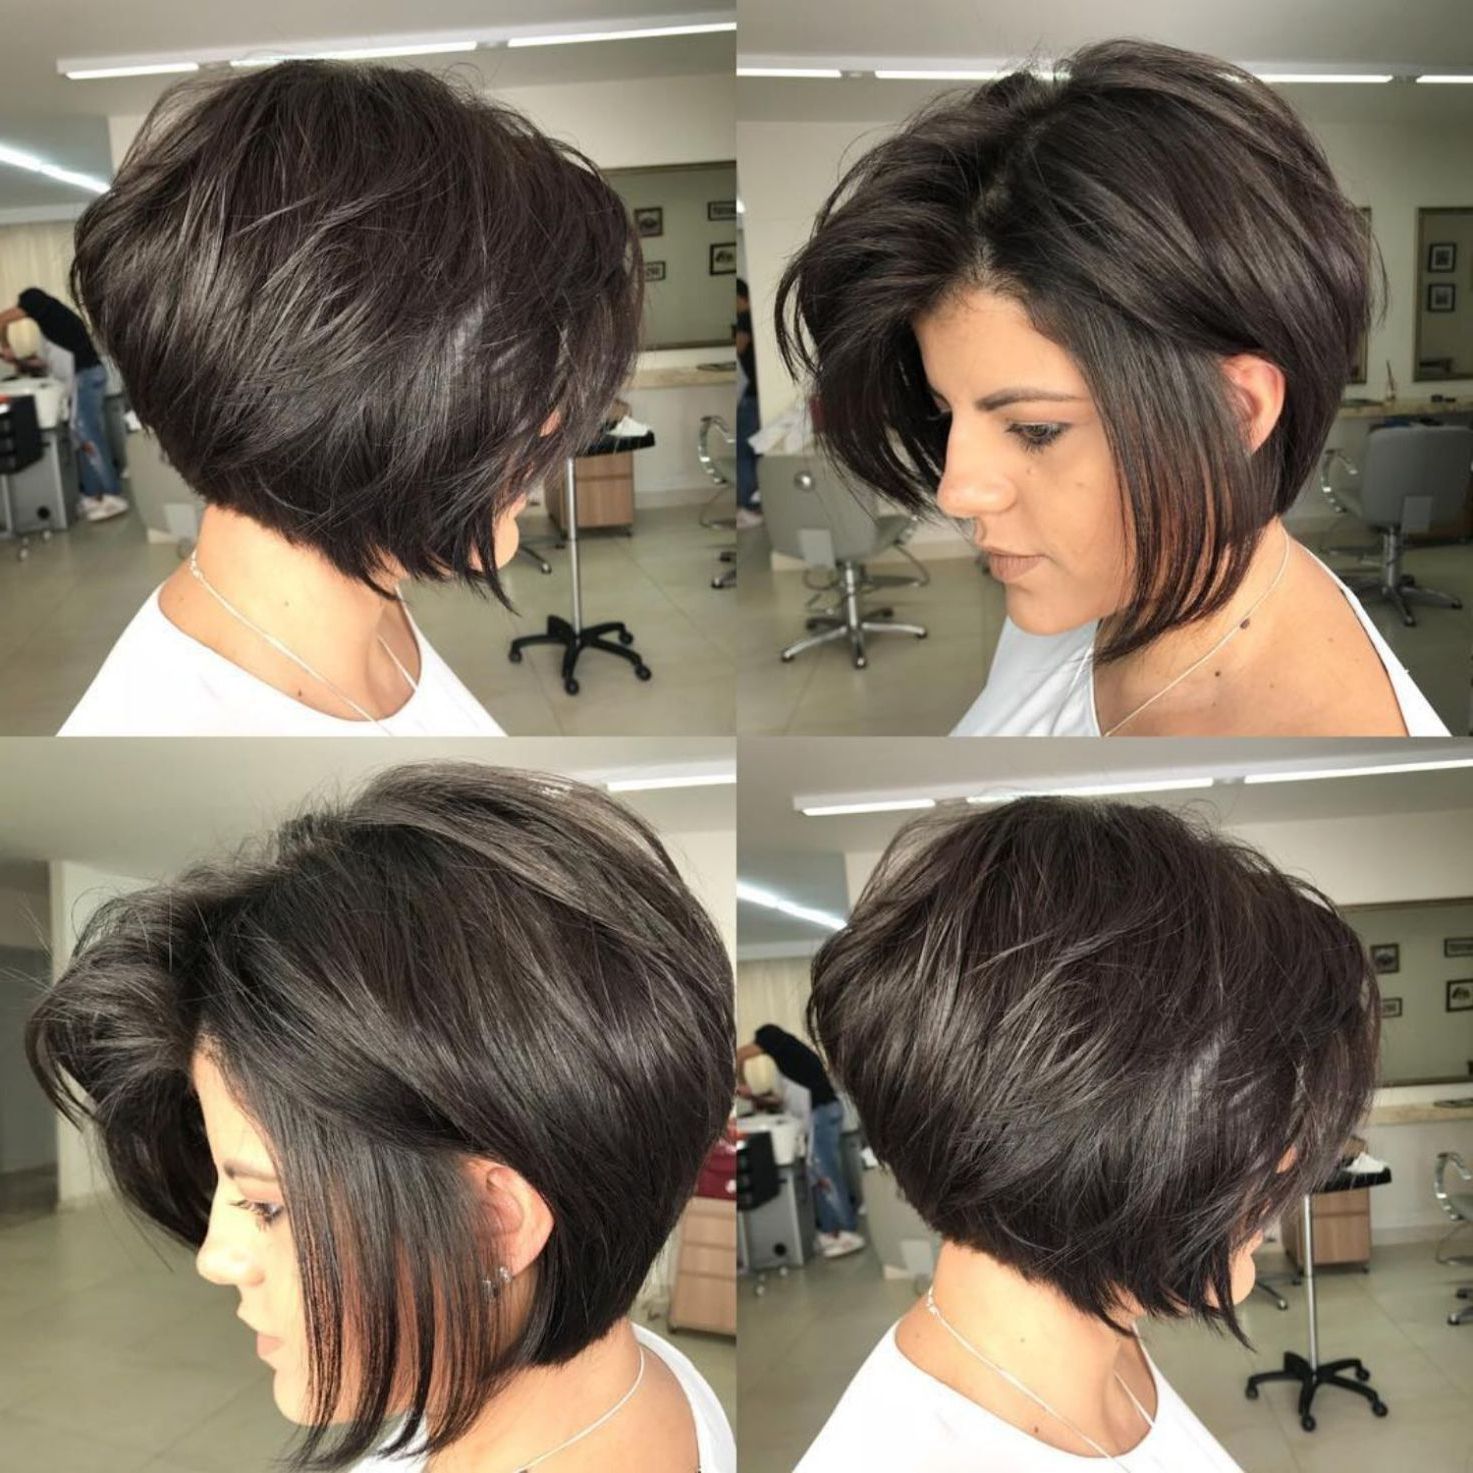 Pin On Hairstyles With Most Up To Date Short Asymmetric Bob Hairstyles With Textured Curls (View 2 of 20)